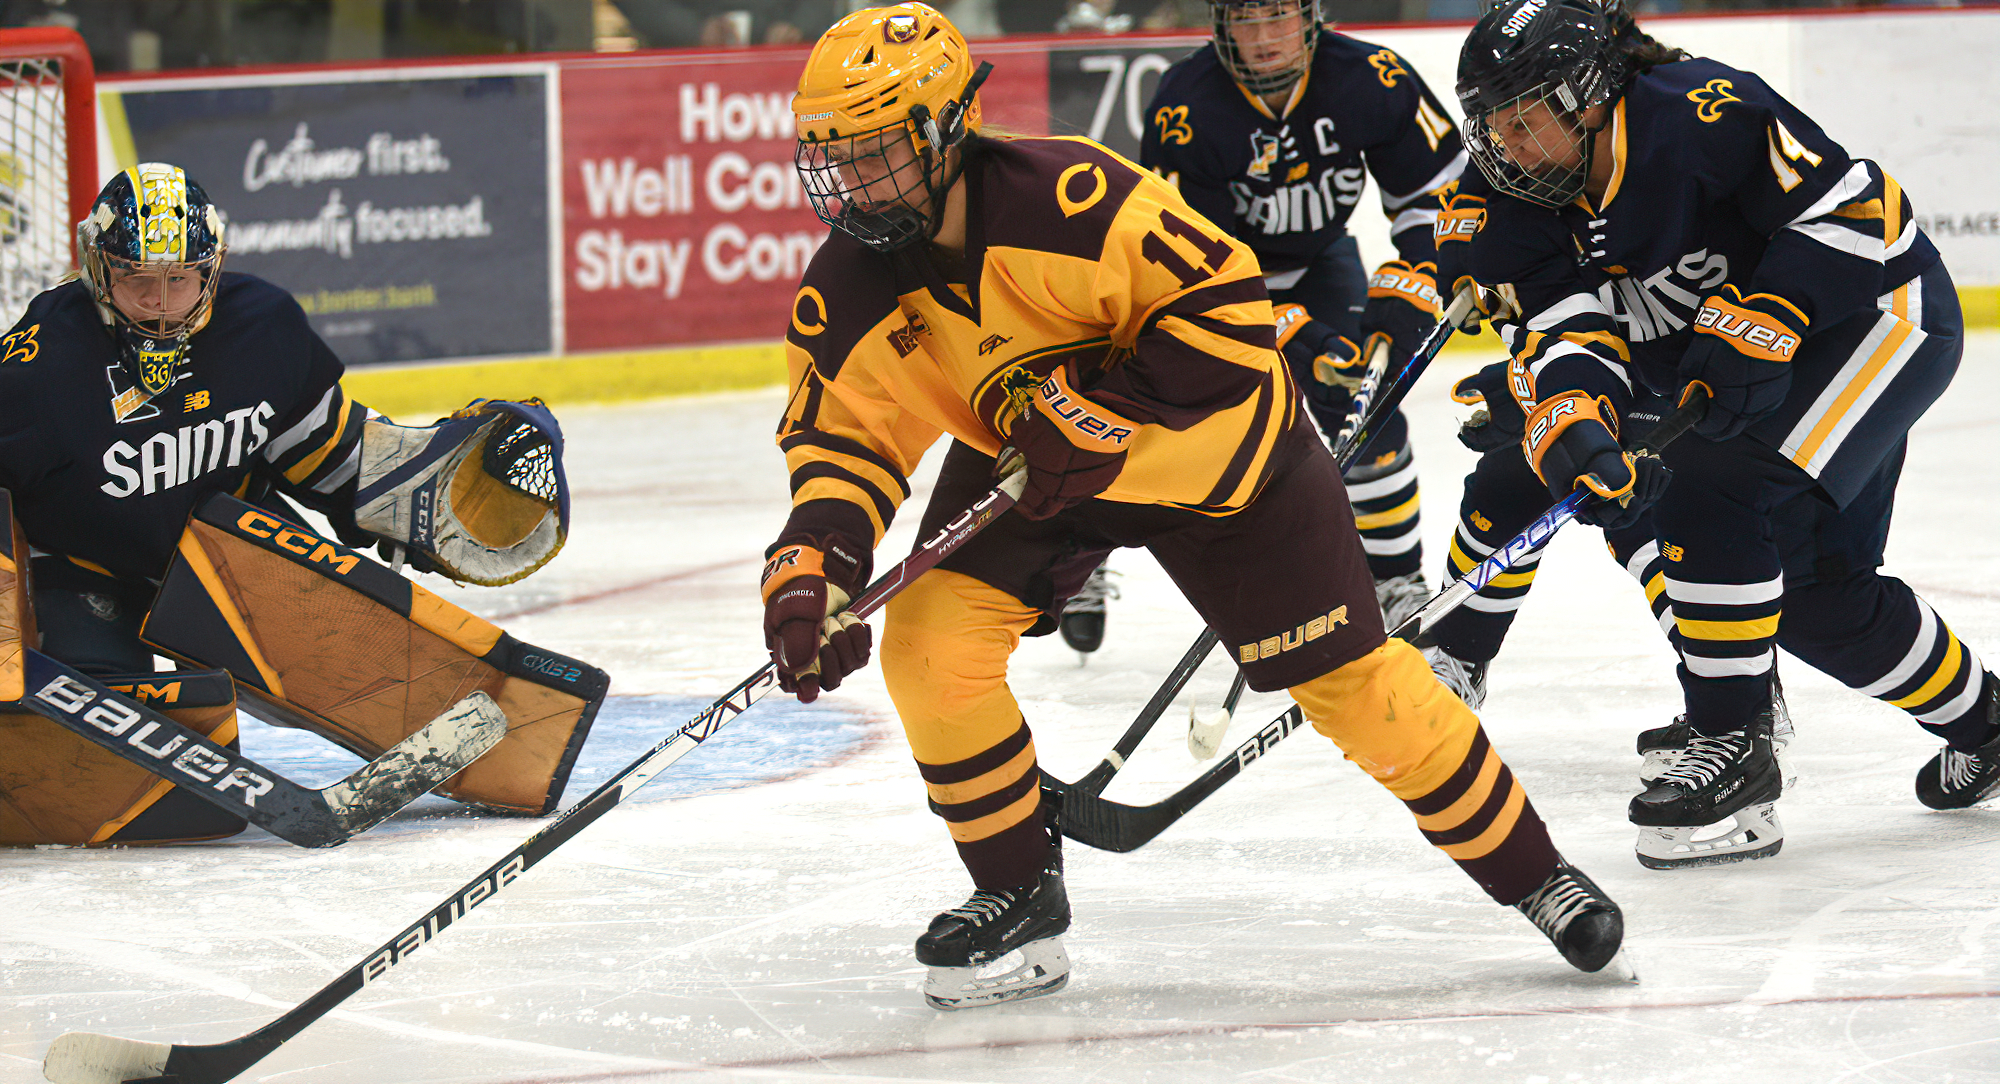 Sophomore Jaclyn Lloyd scored her third goal of the season in the Cobbers' series opener at St. Scholastica.